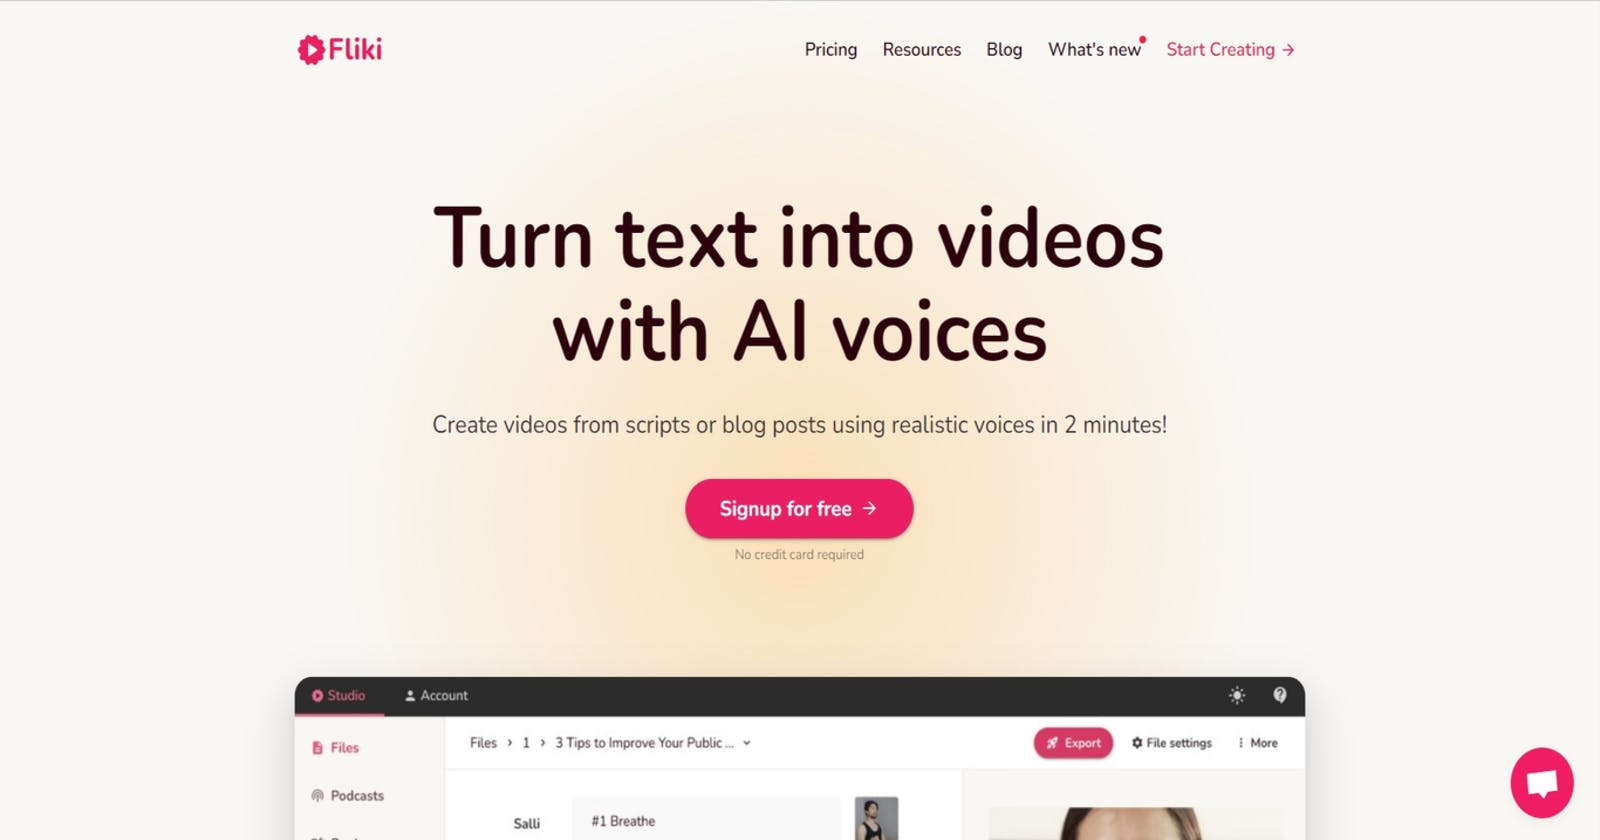 Introducing Fliki: Transforming Text into Videos with AI Voices